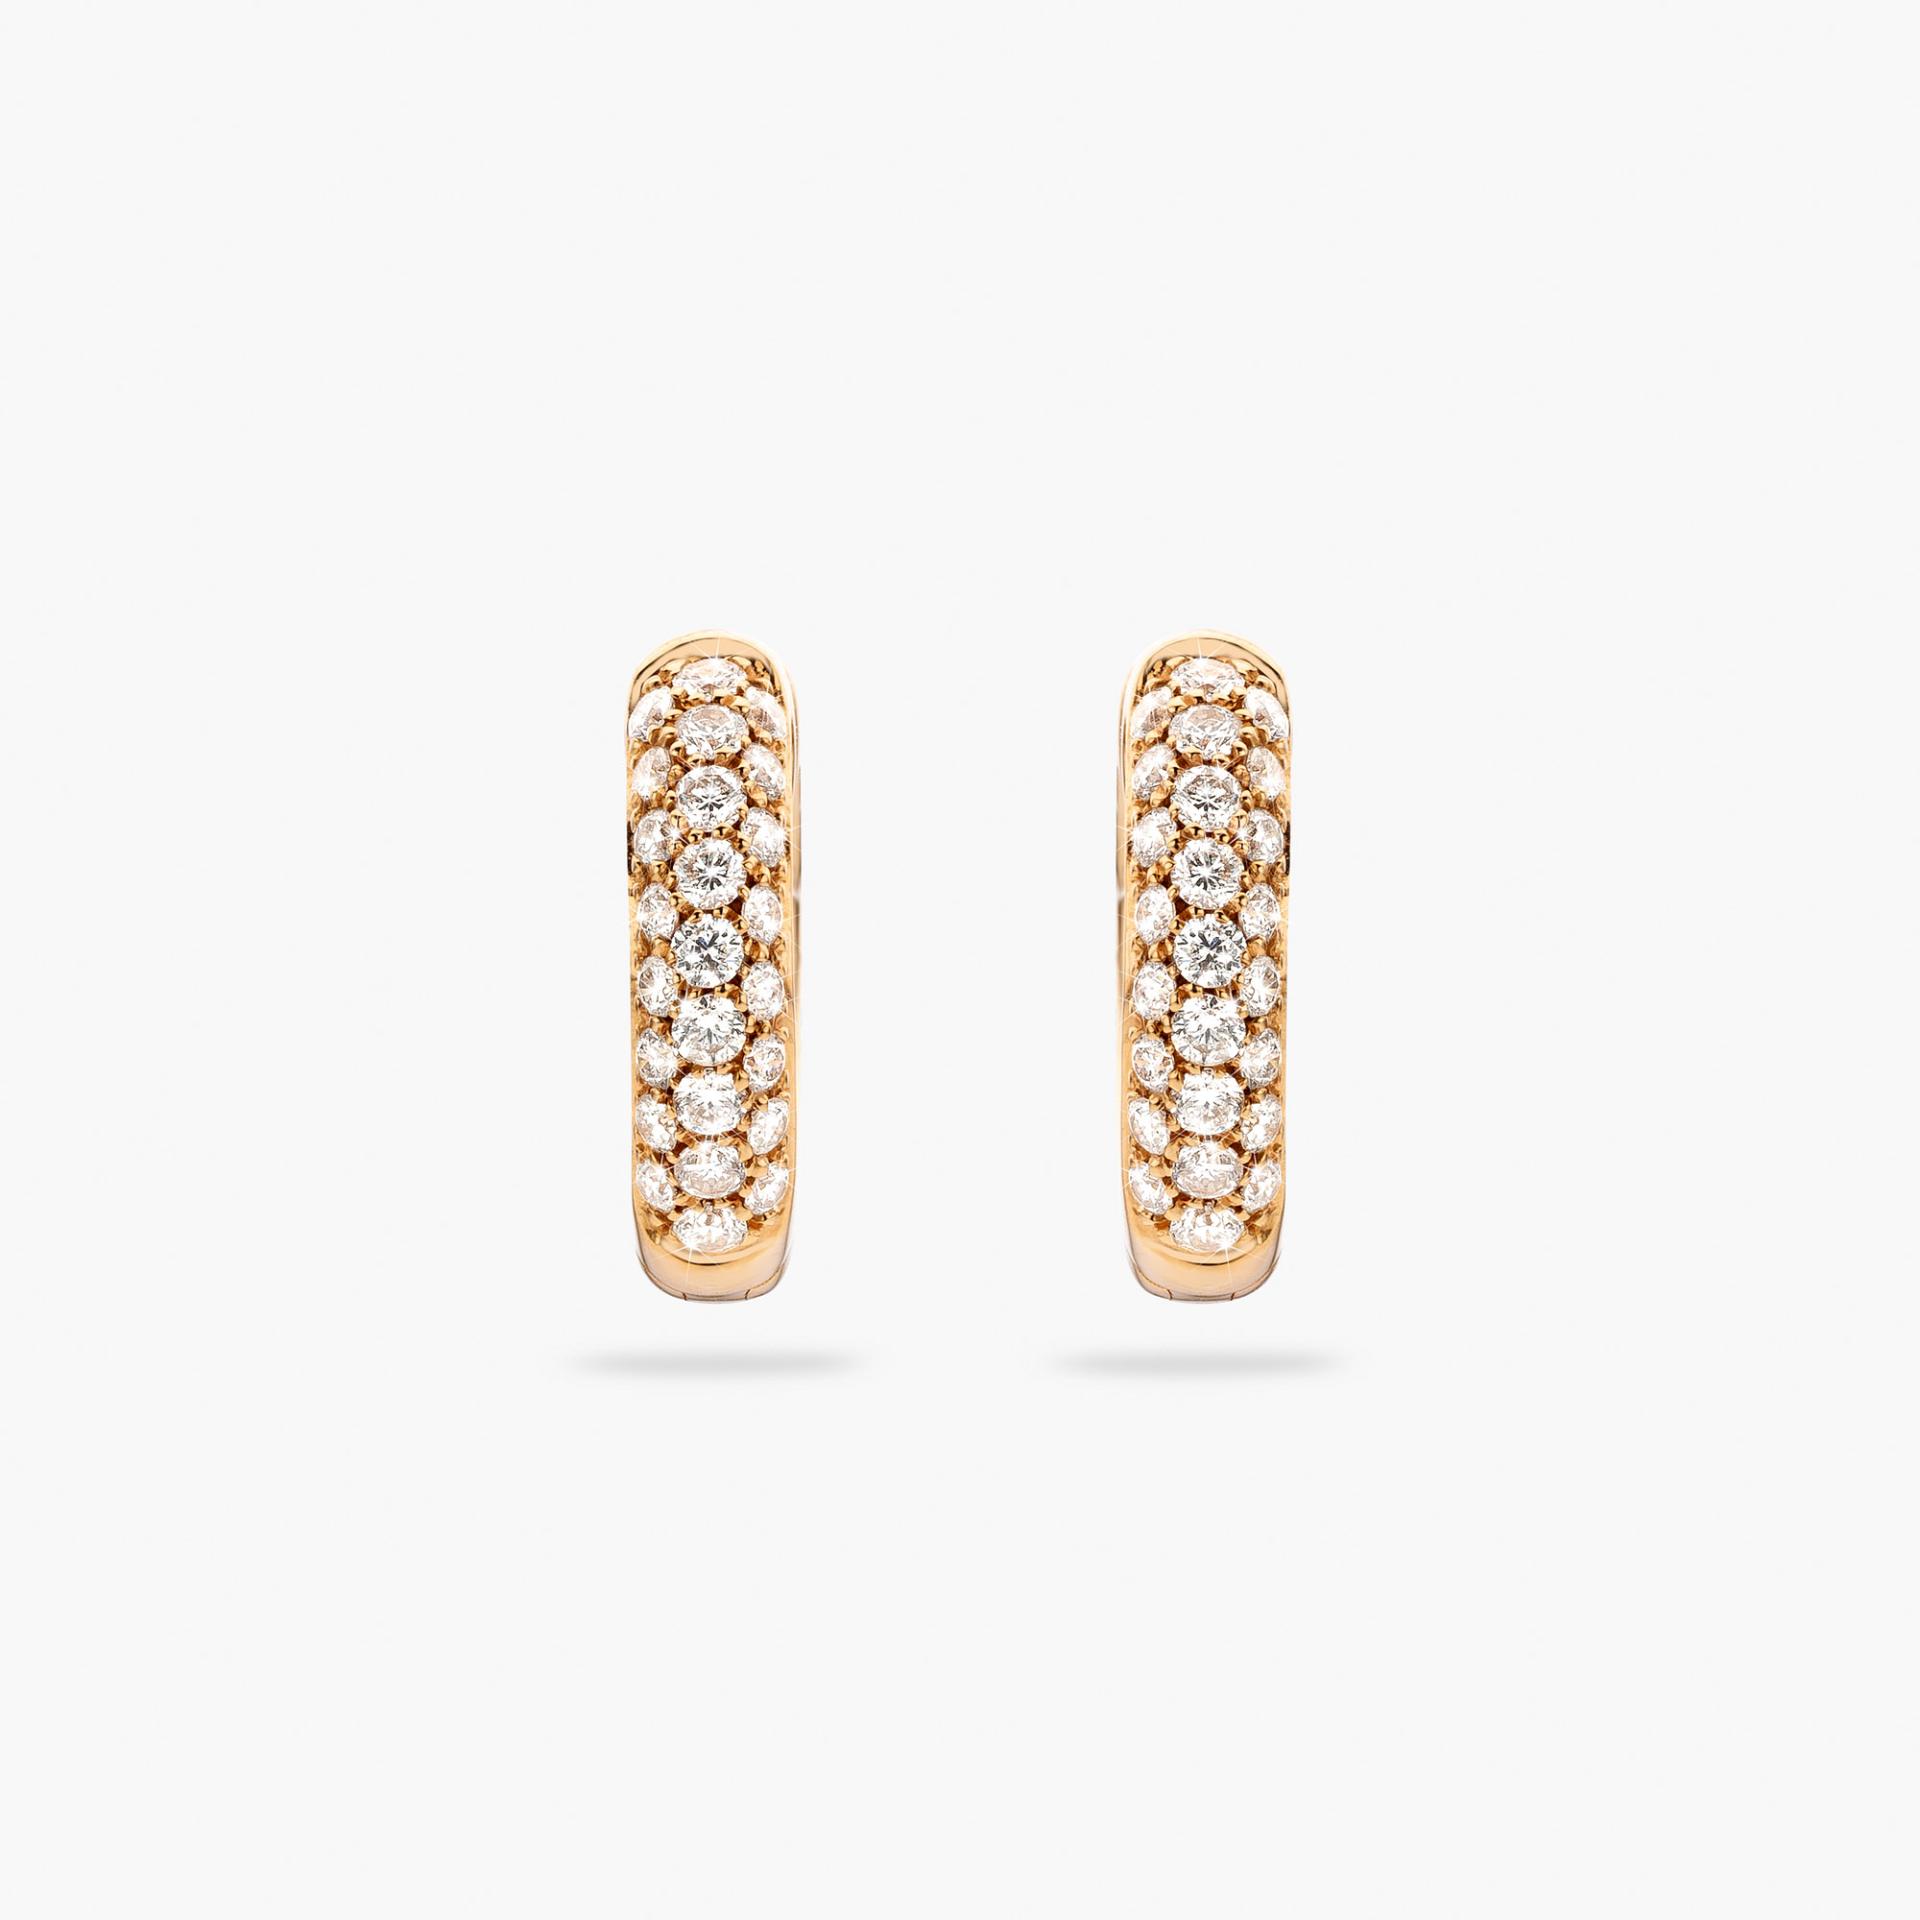 Rose gold earrings set with brilliants made by Maison De Greef